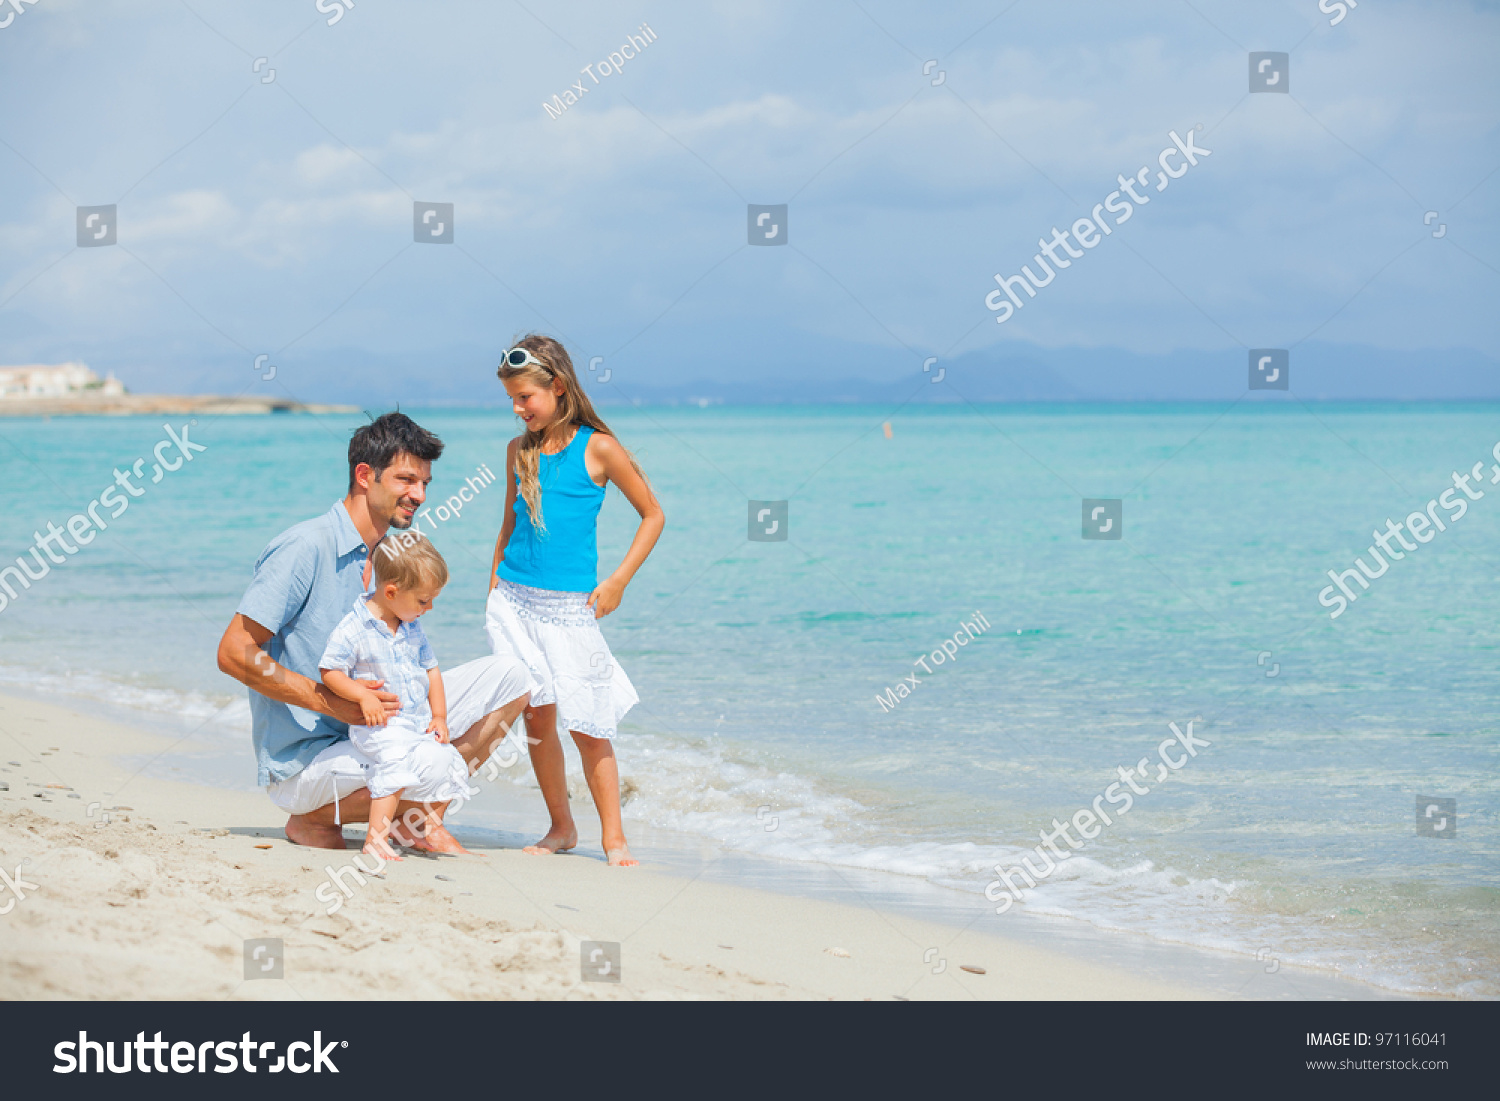 Young father with her two kids on tropical beach vacation #97116041